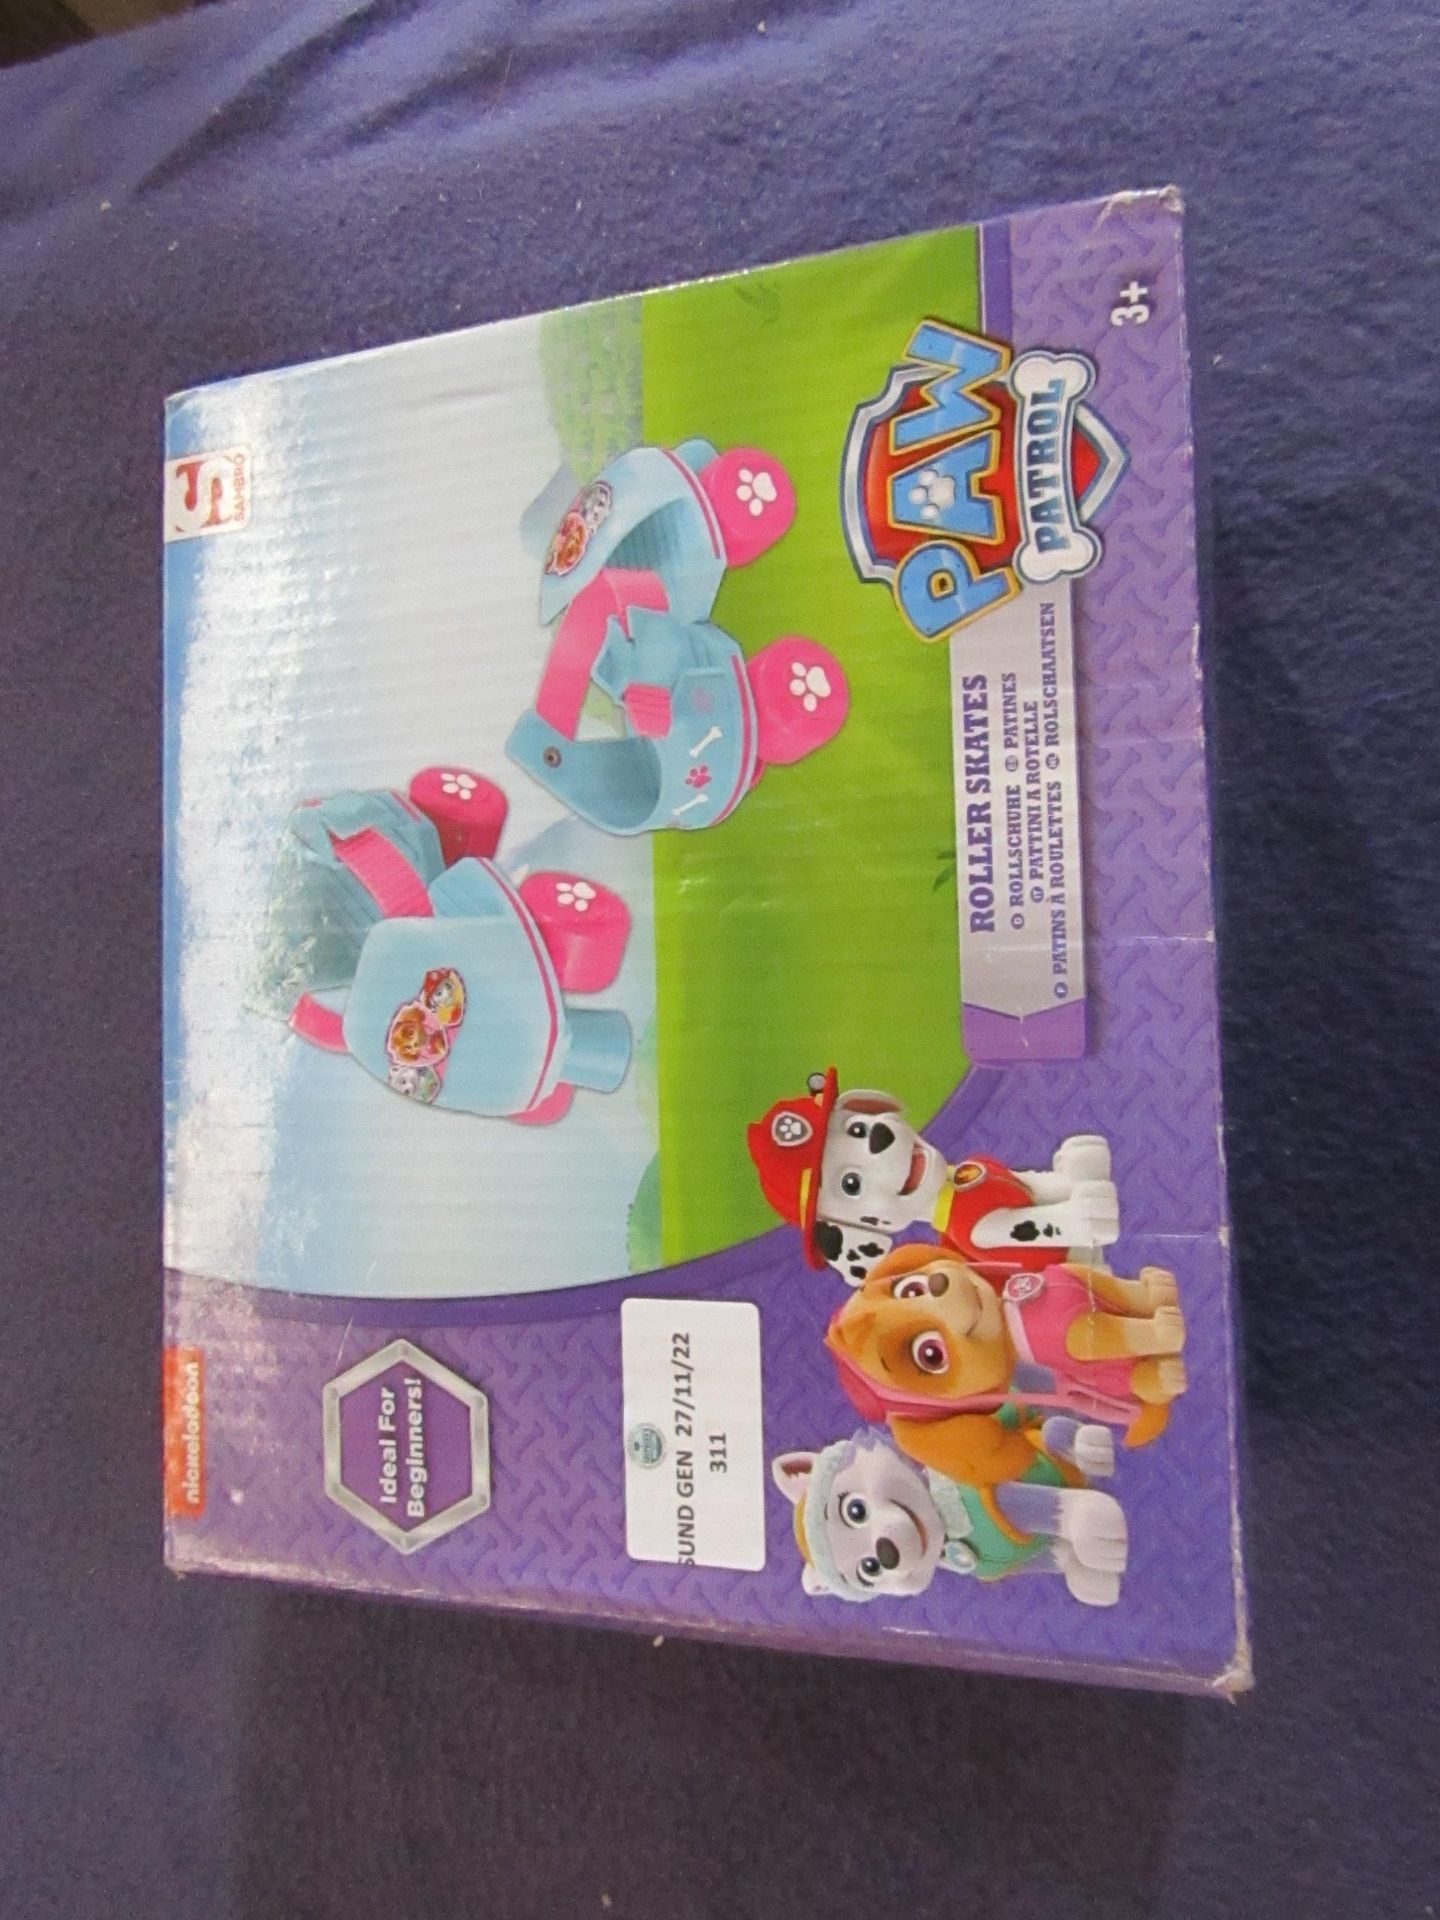 Nickelodeon - Paw Patrol Skye Rollwer Skates ( 3+) - Unchecked & Boxed.